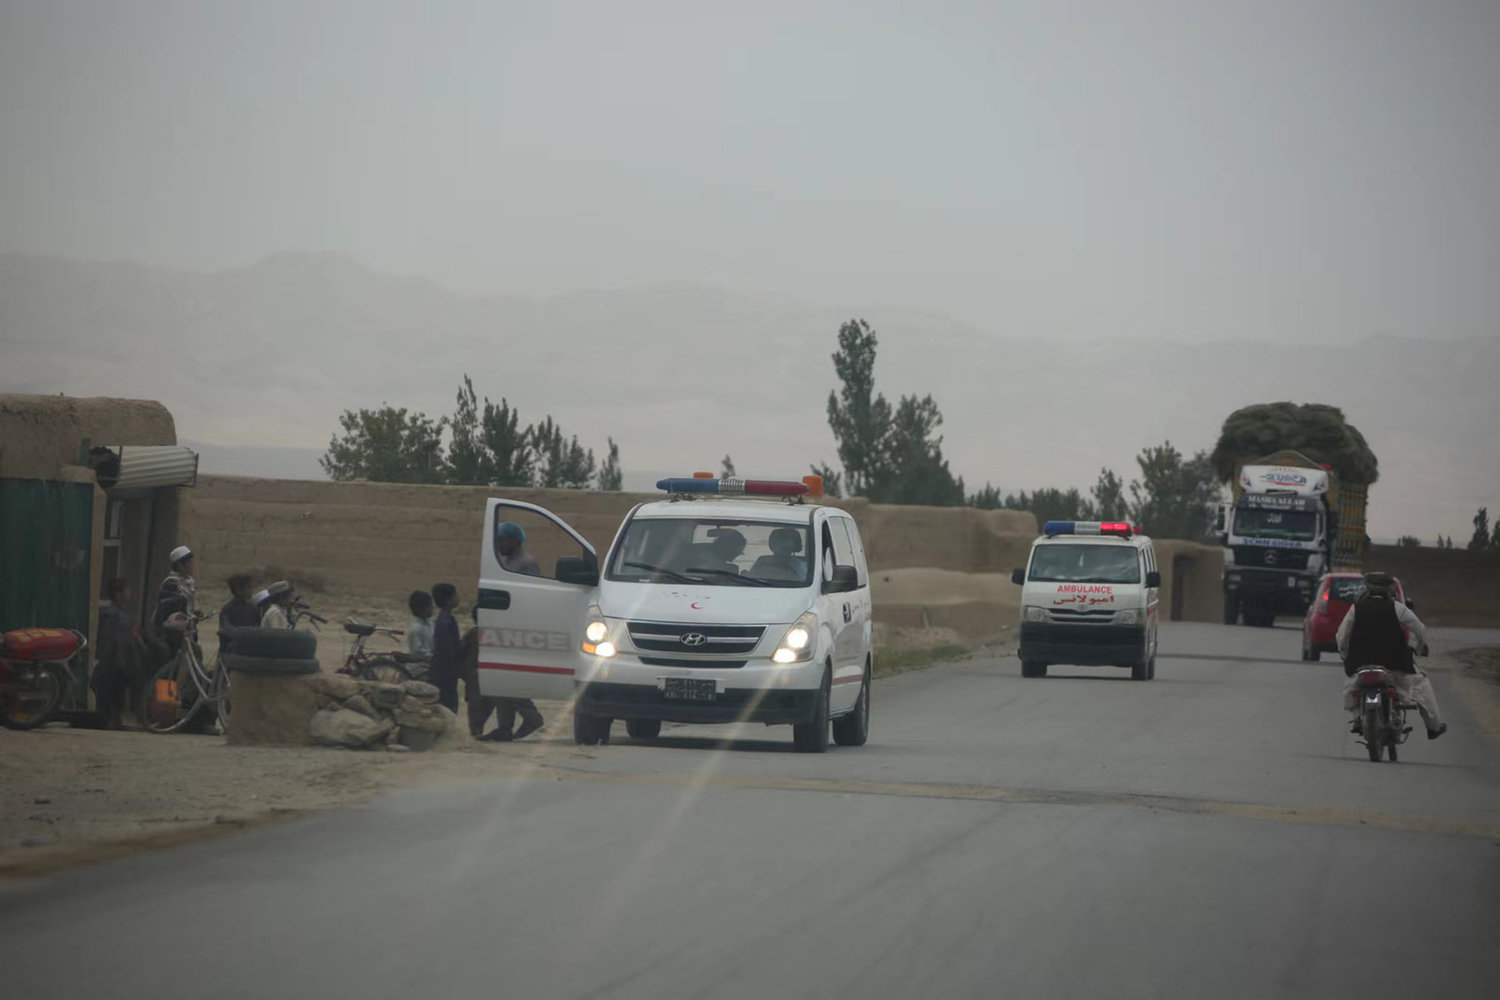 Ambulances arrive on the road in Paktika province, Afghanistan on Wednesday, June 22, 2022. The death toll from an earthquake that struck eastern Afghanistan early Wednesday has reached 920, while more than 600 people were injured, a disaster official said, adding the number of casualties might rise further. (Saifurahman Safi/Xinhua via ZUMA Press/TNS)